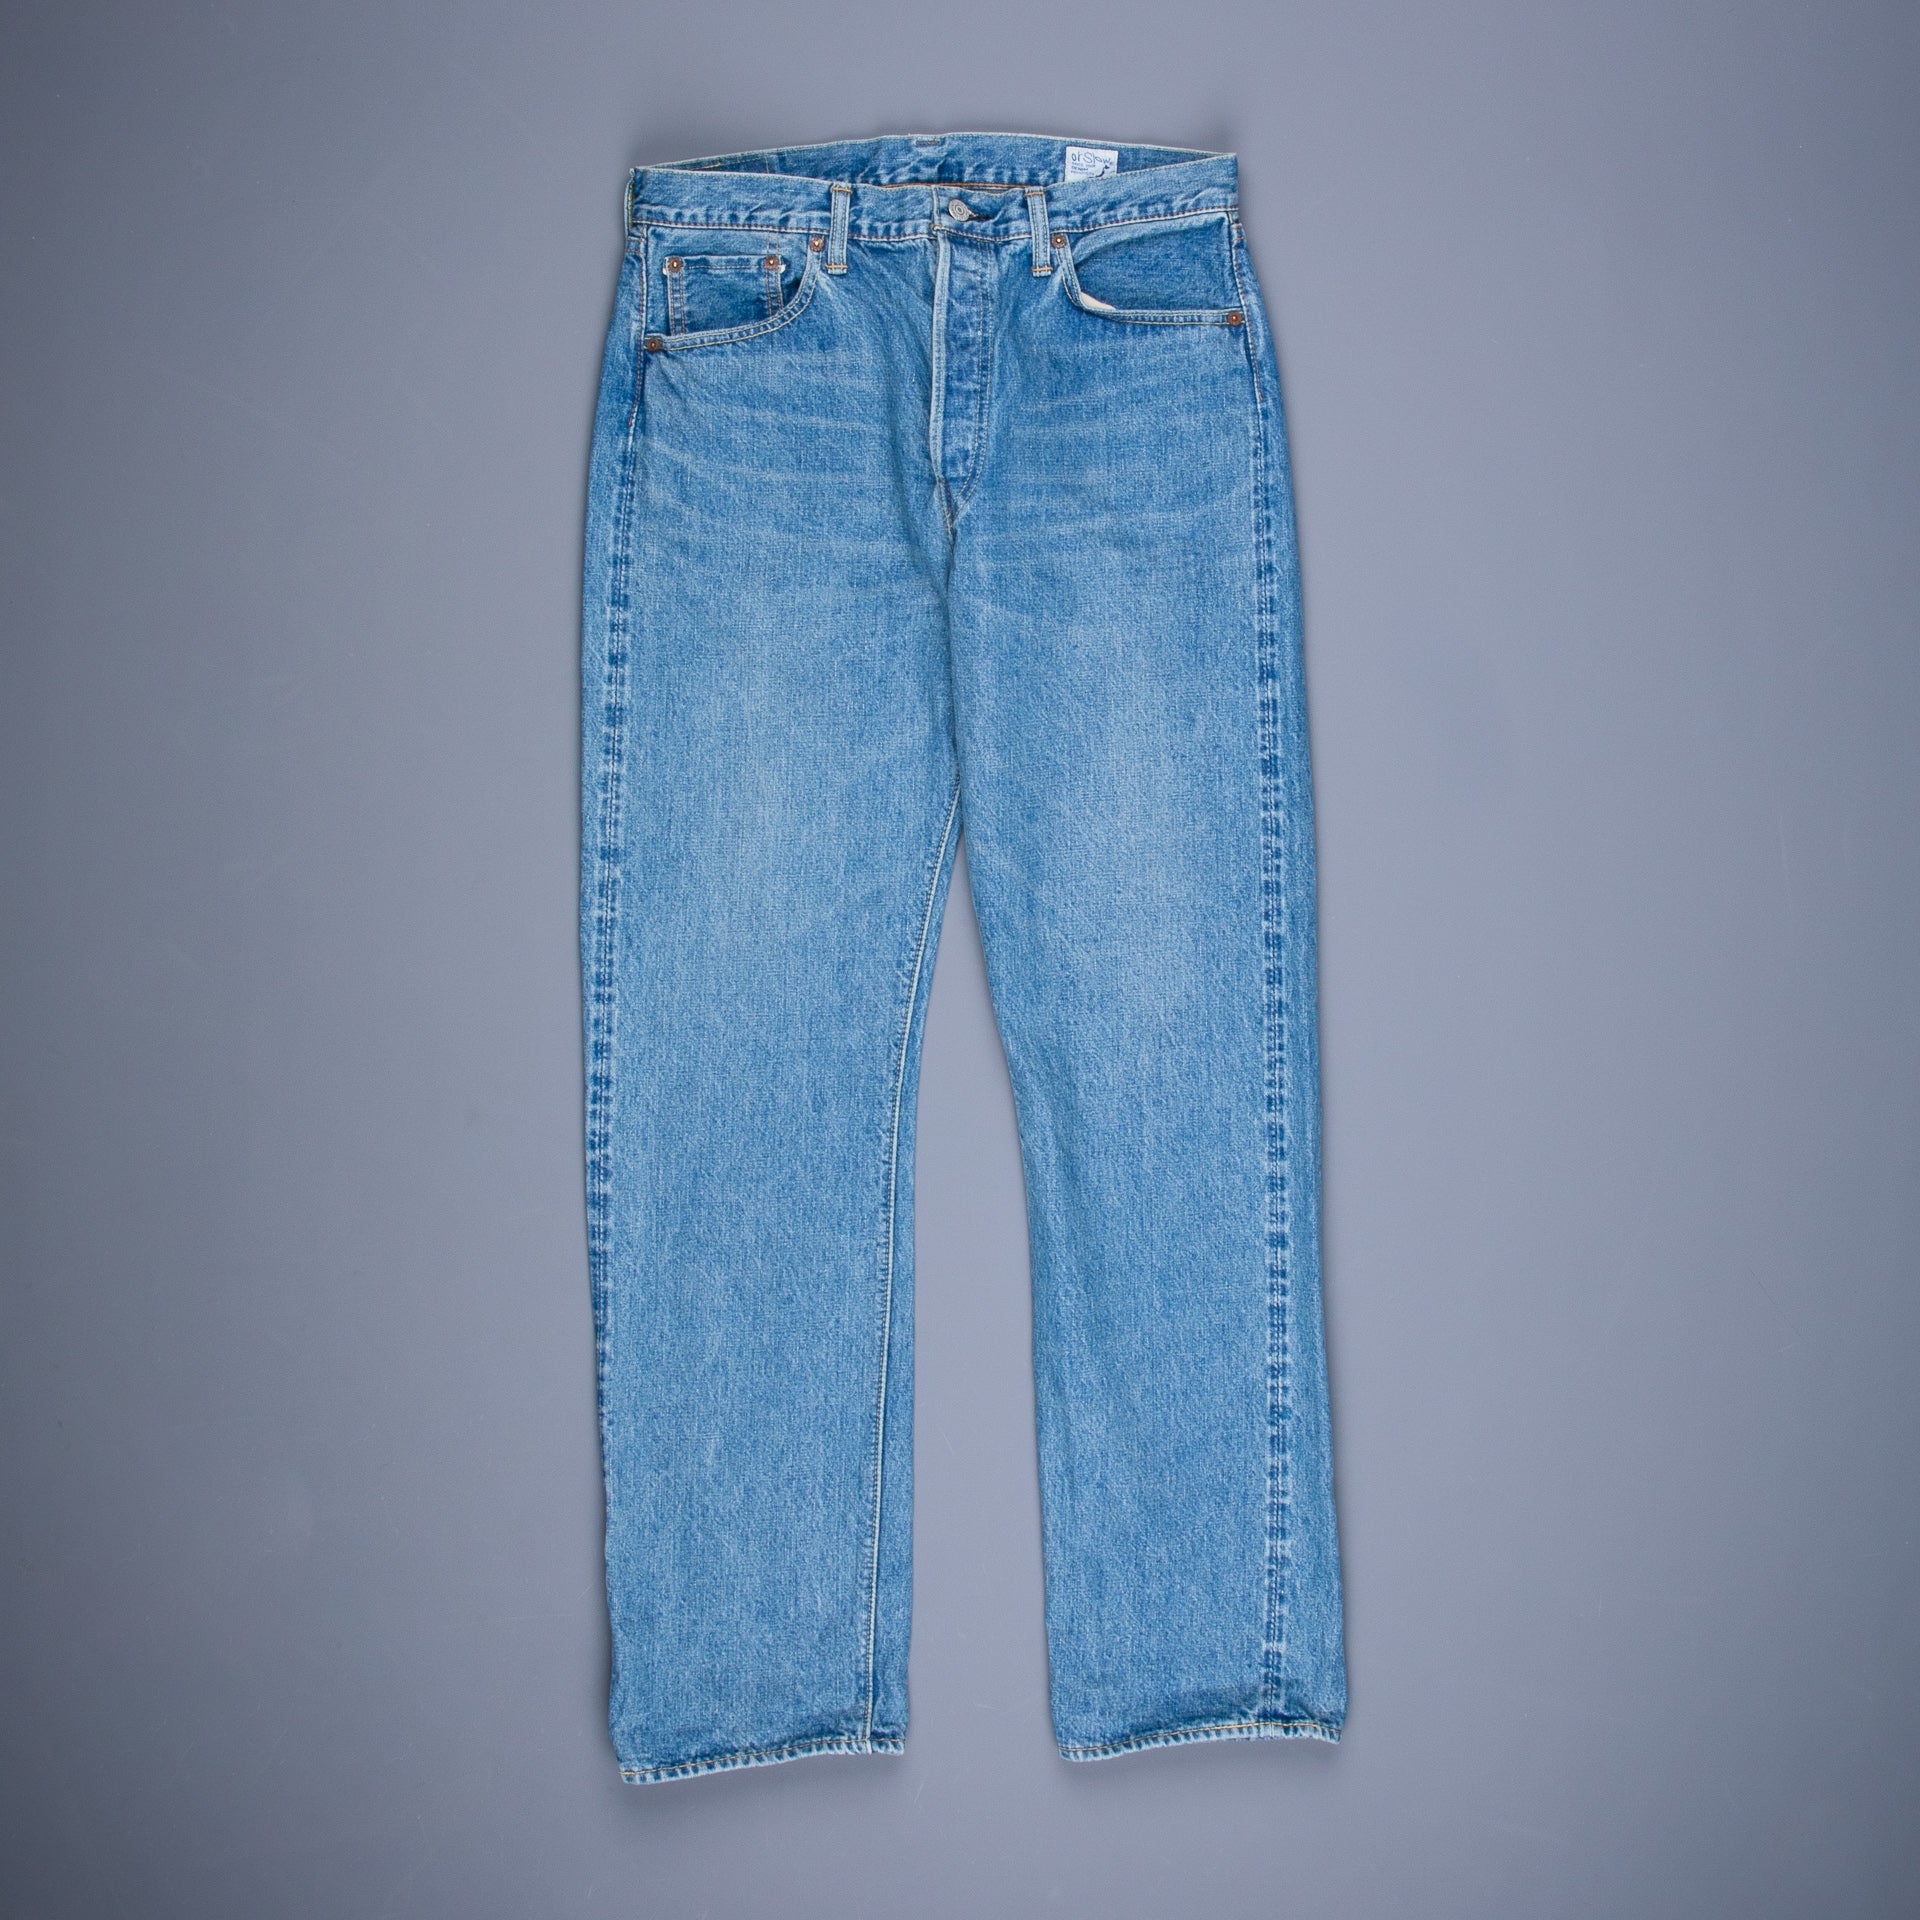 OrSlow 105 Standard Fit 3 year wash  Frans Boone Exclusive